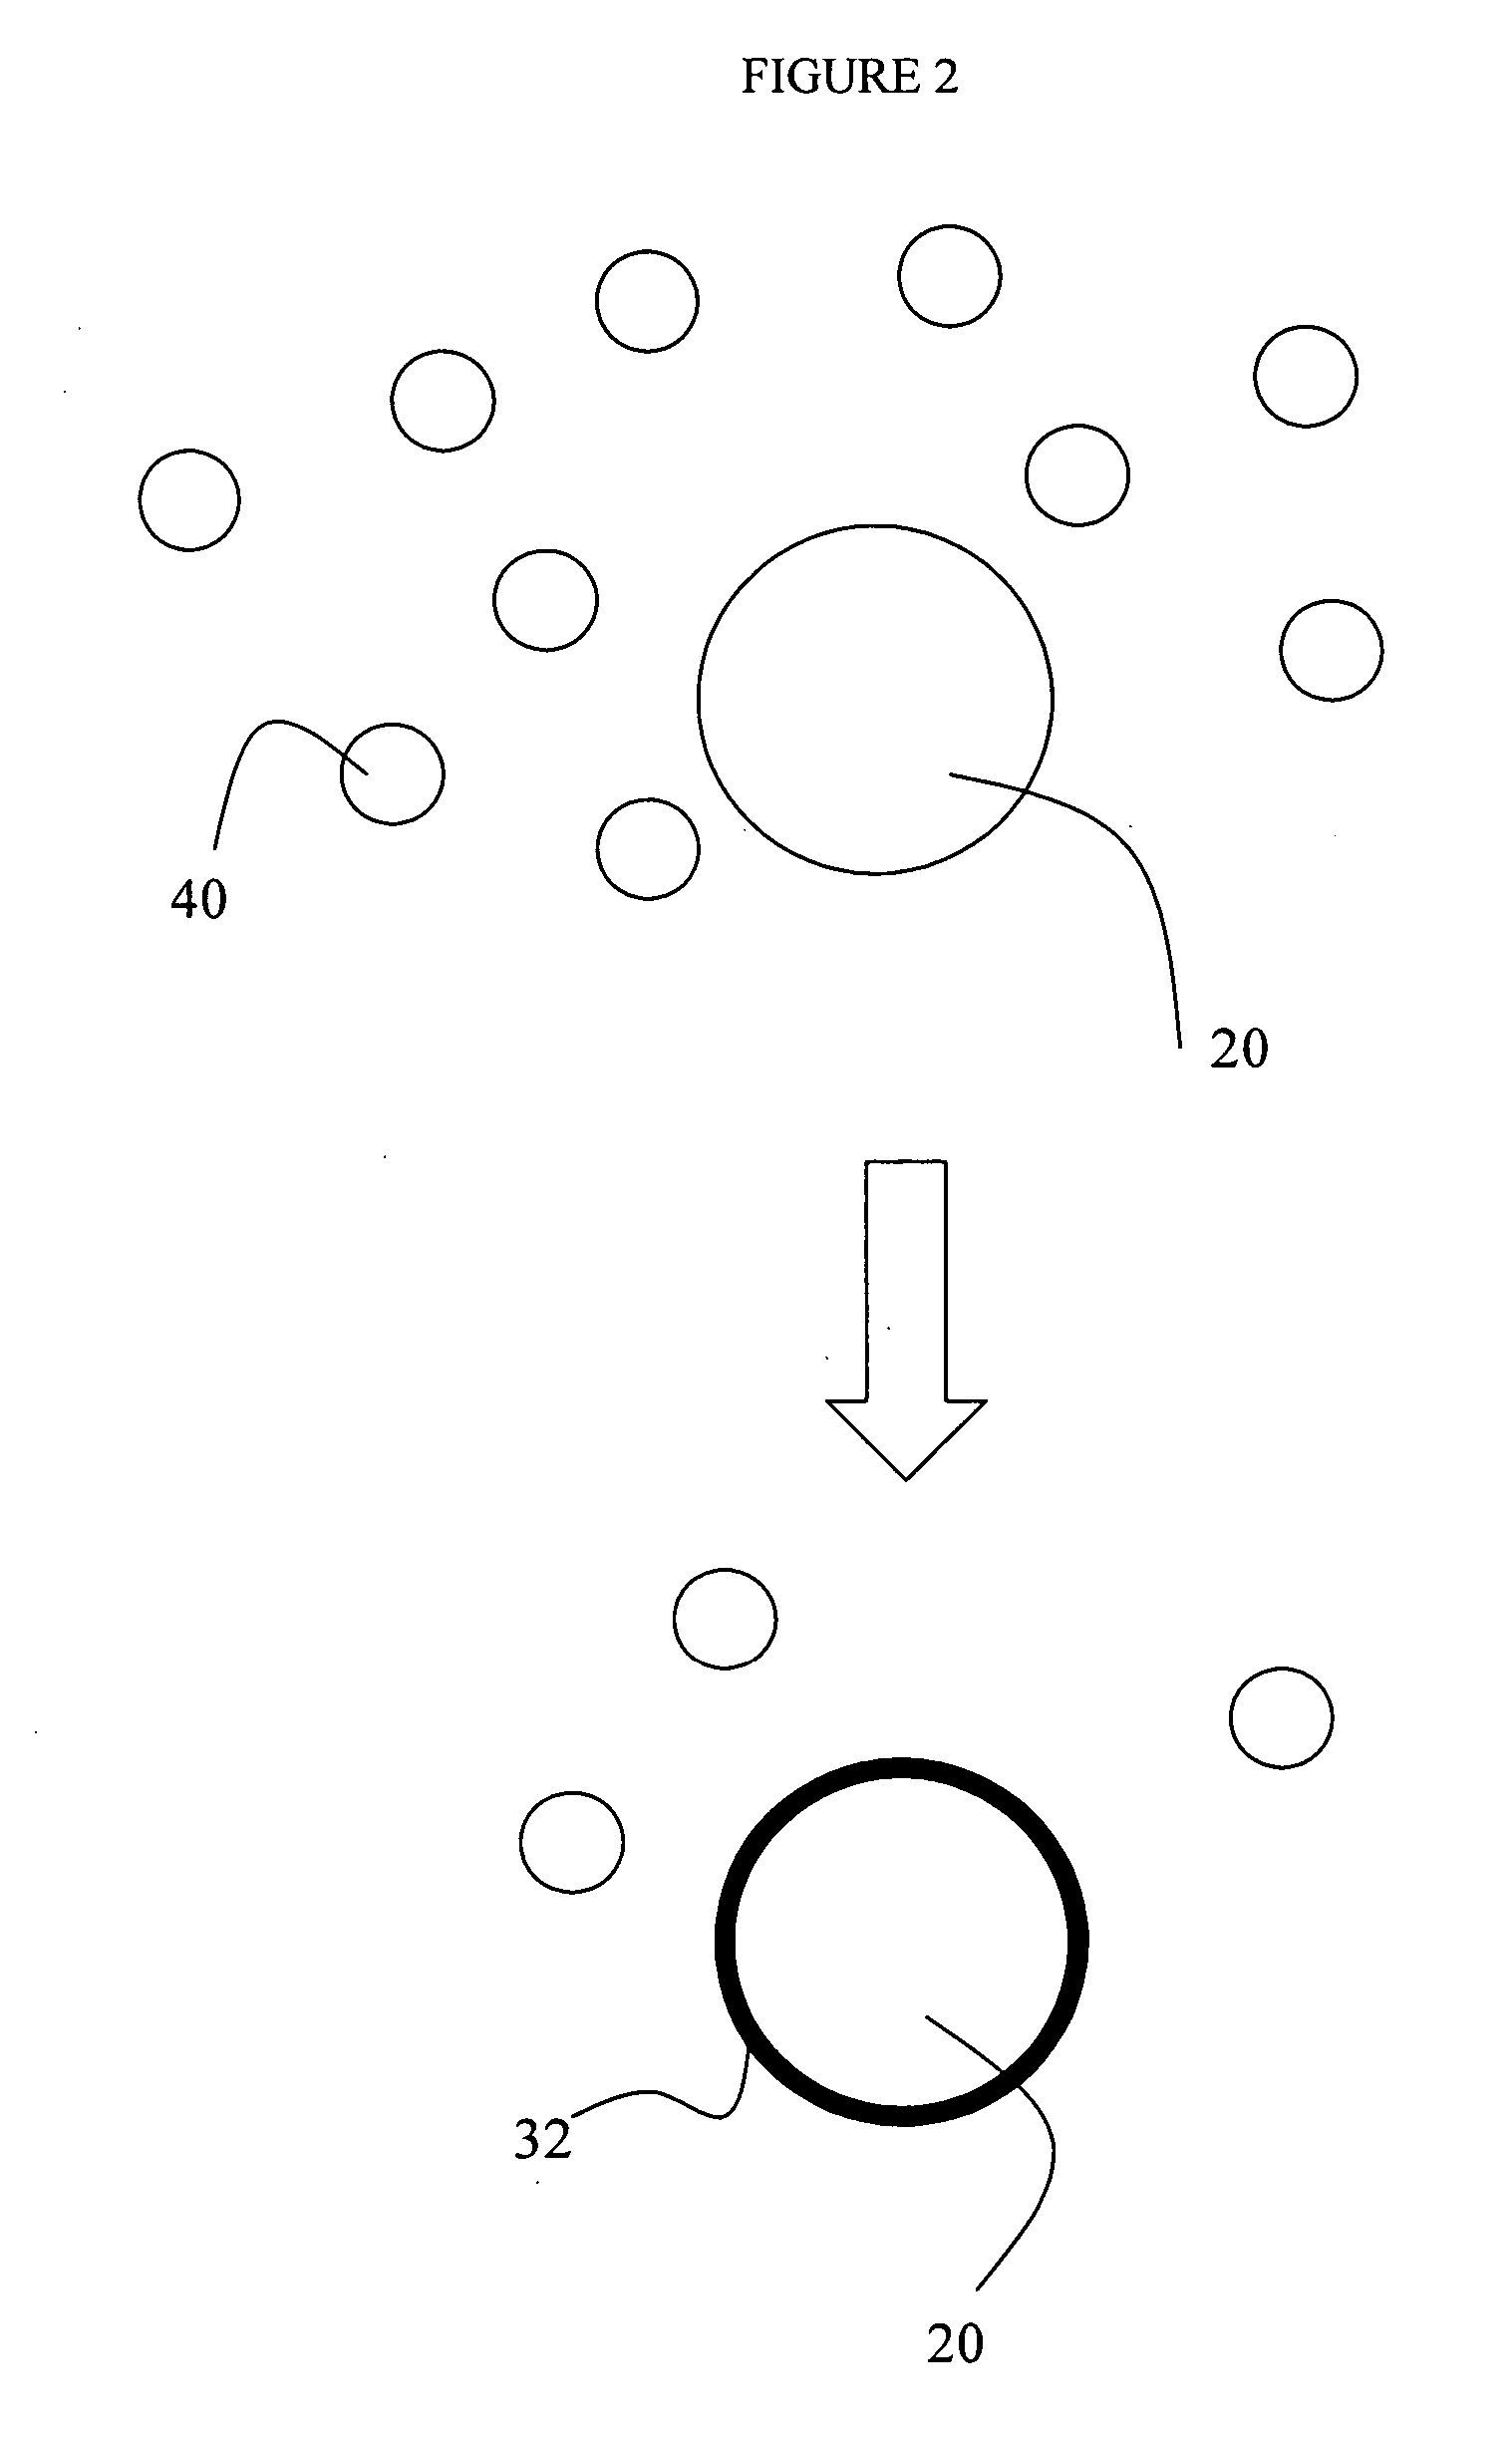 Method and system for detecting, classifying and identifying particles